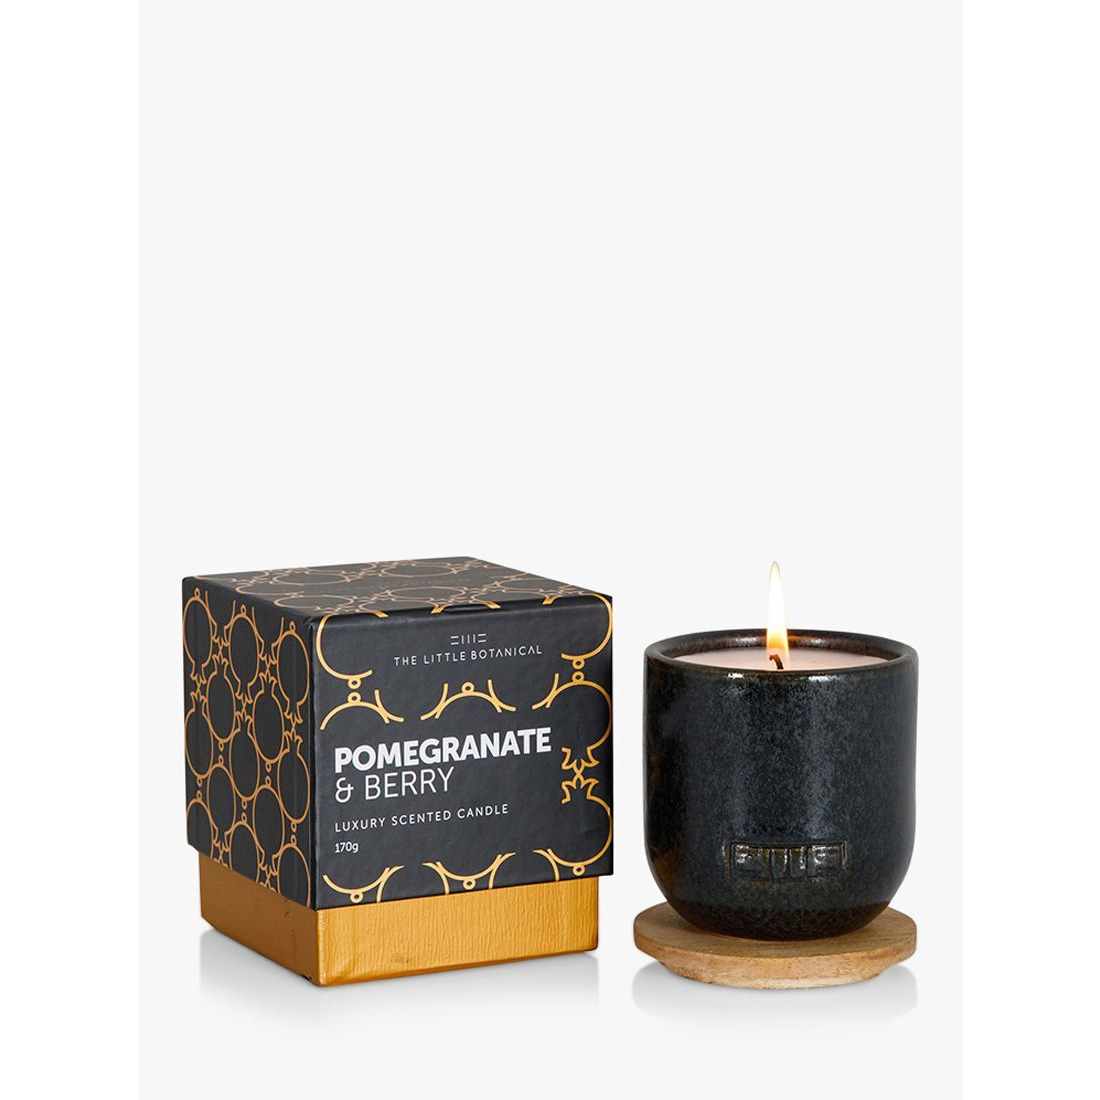 The Little Botanical Pomegranate and Berry Luxury Scented Candle - image 1